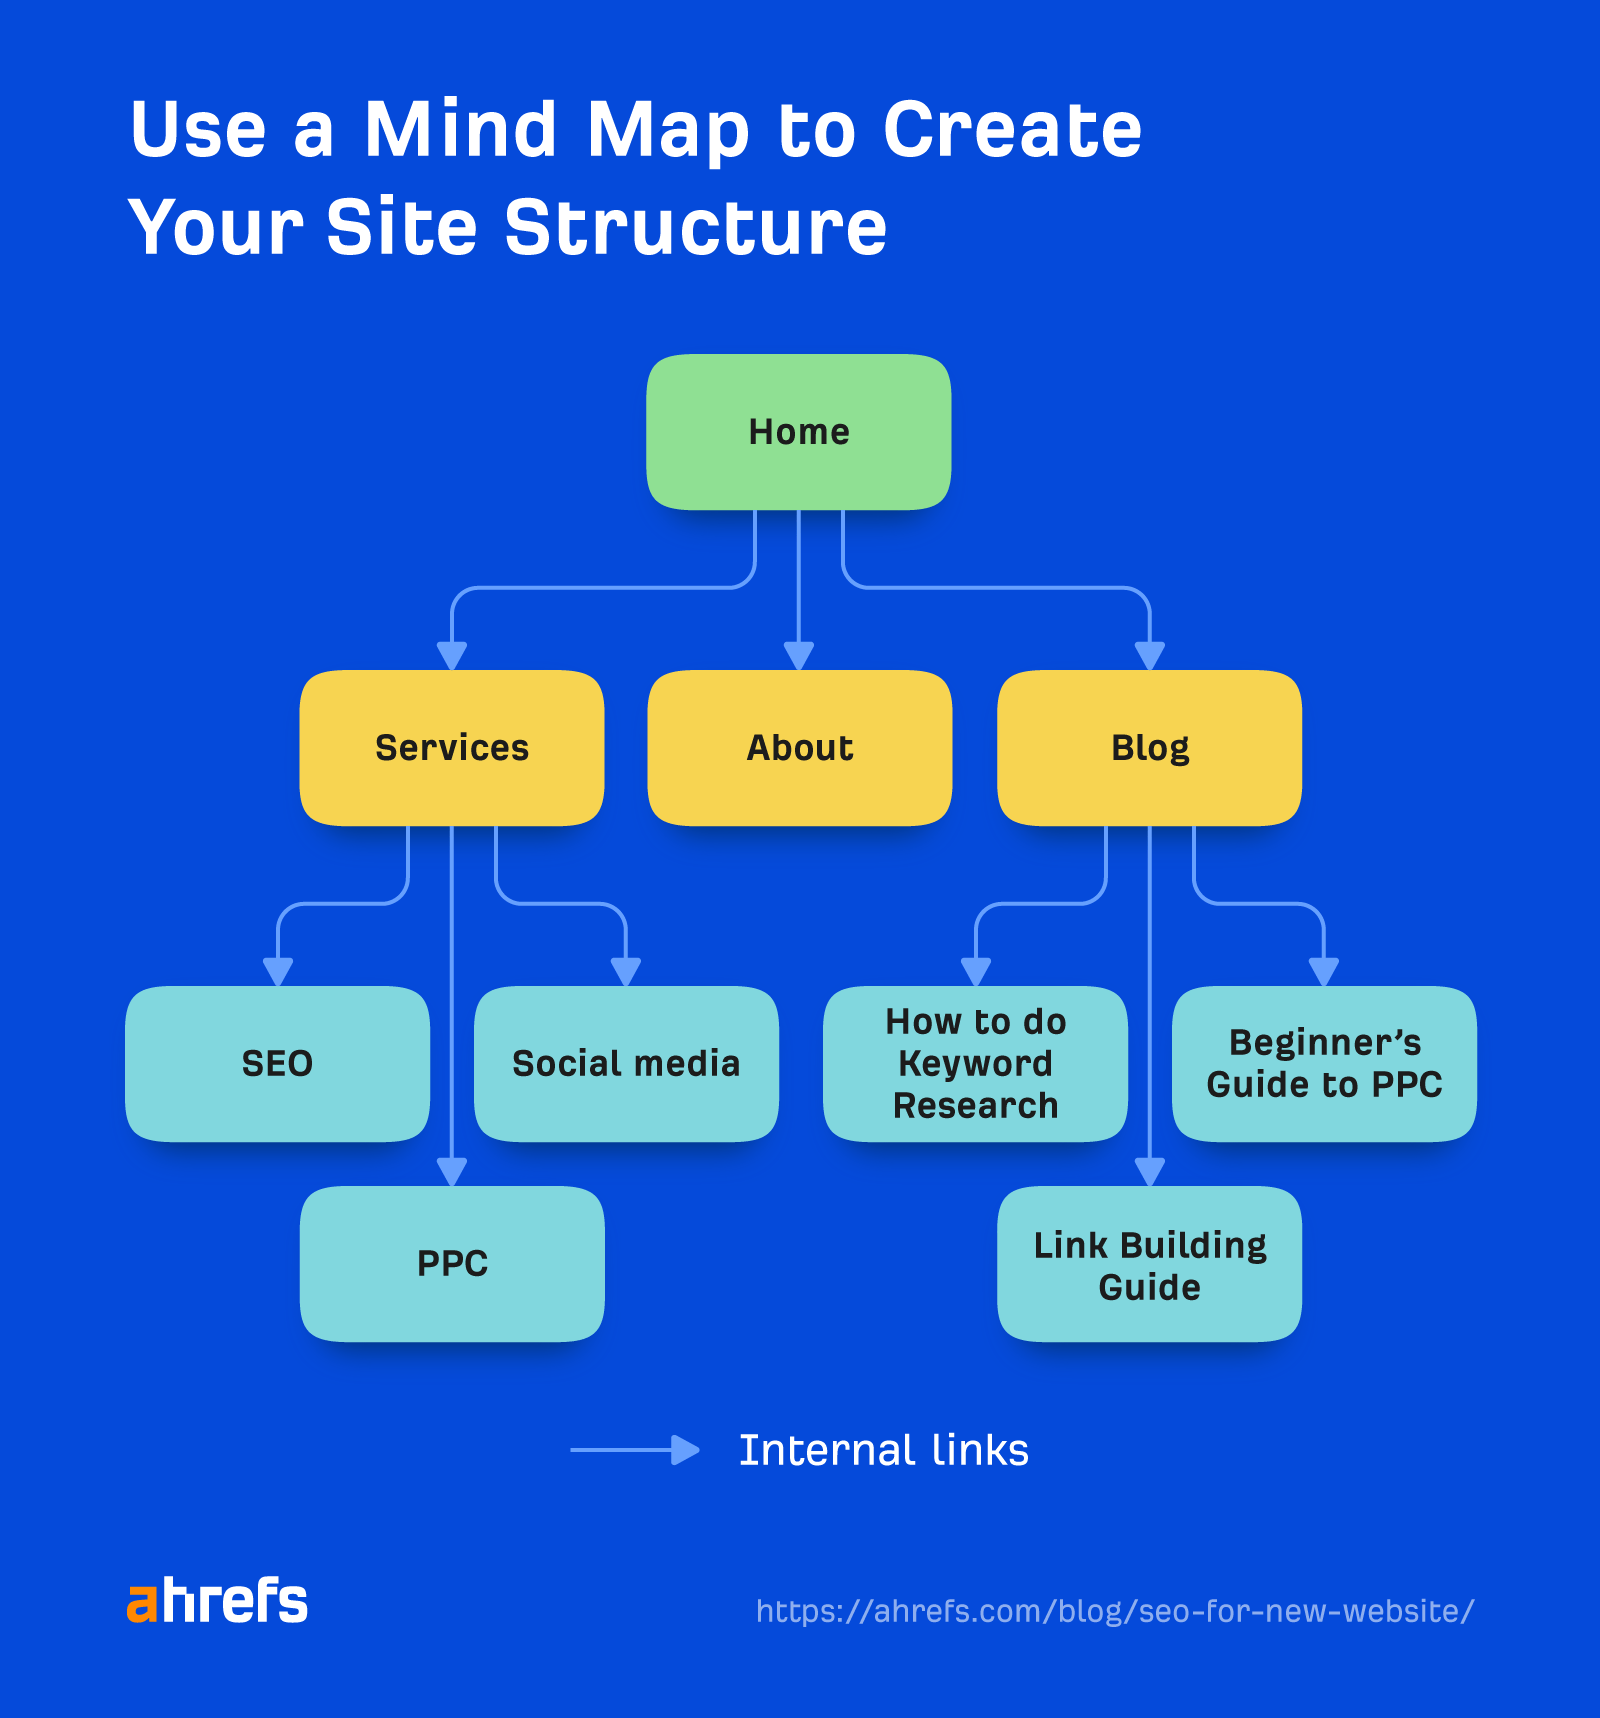 How to use a mindmap to create your site structure